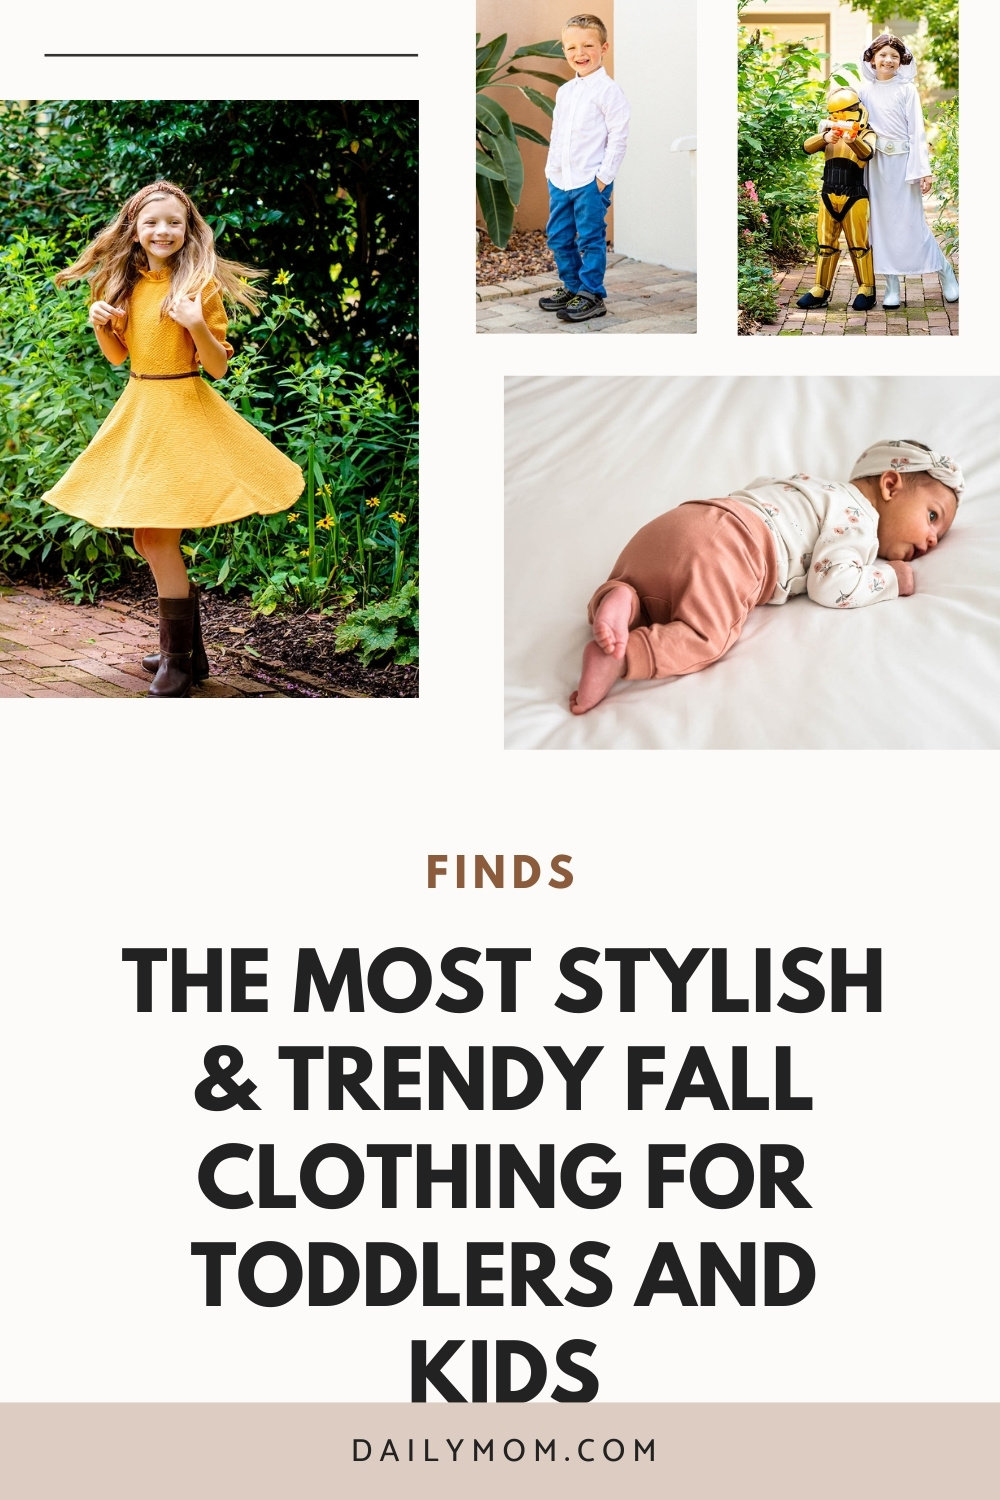 Fall Clothing For Toddlers And Kids: 13 Stylish &Amp; Trendy Brands To Sport This Season